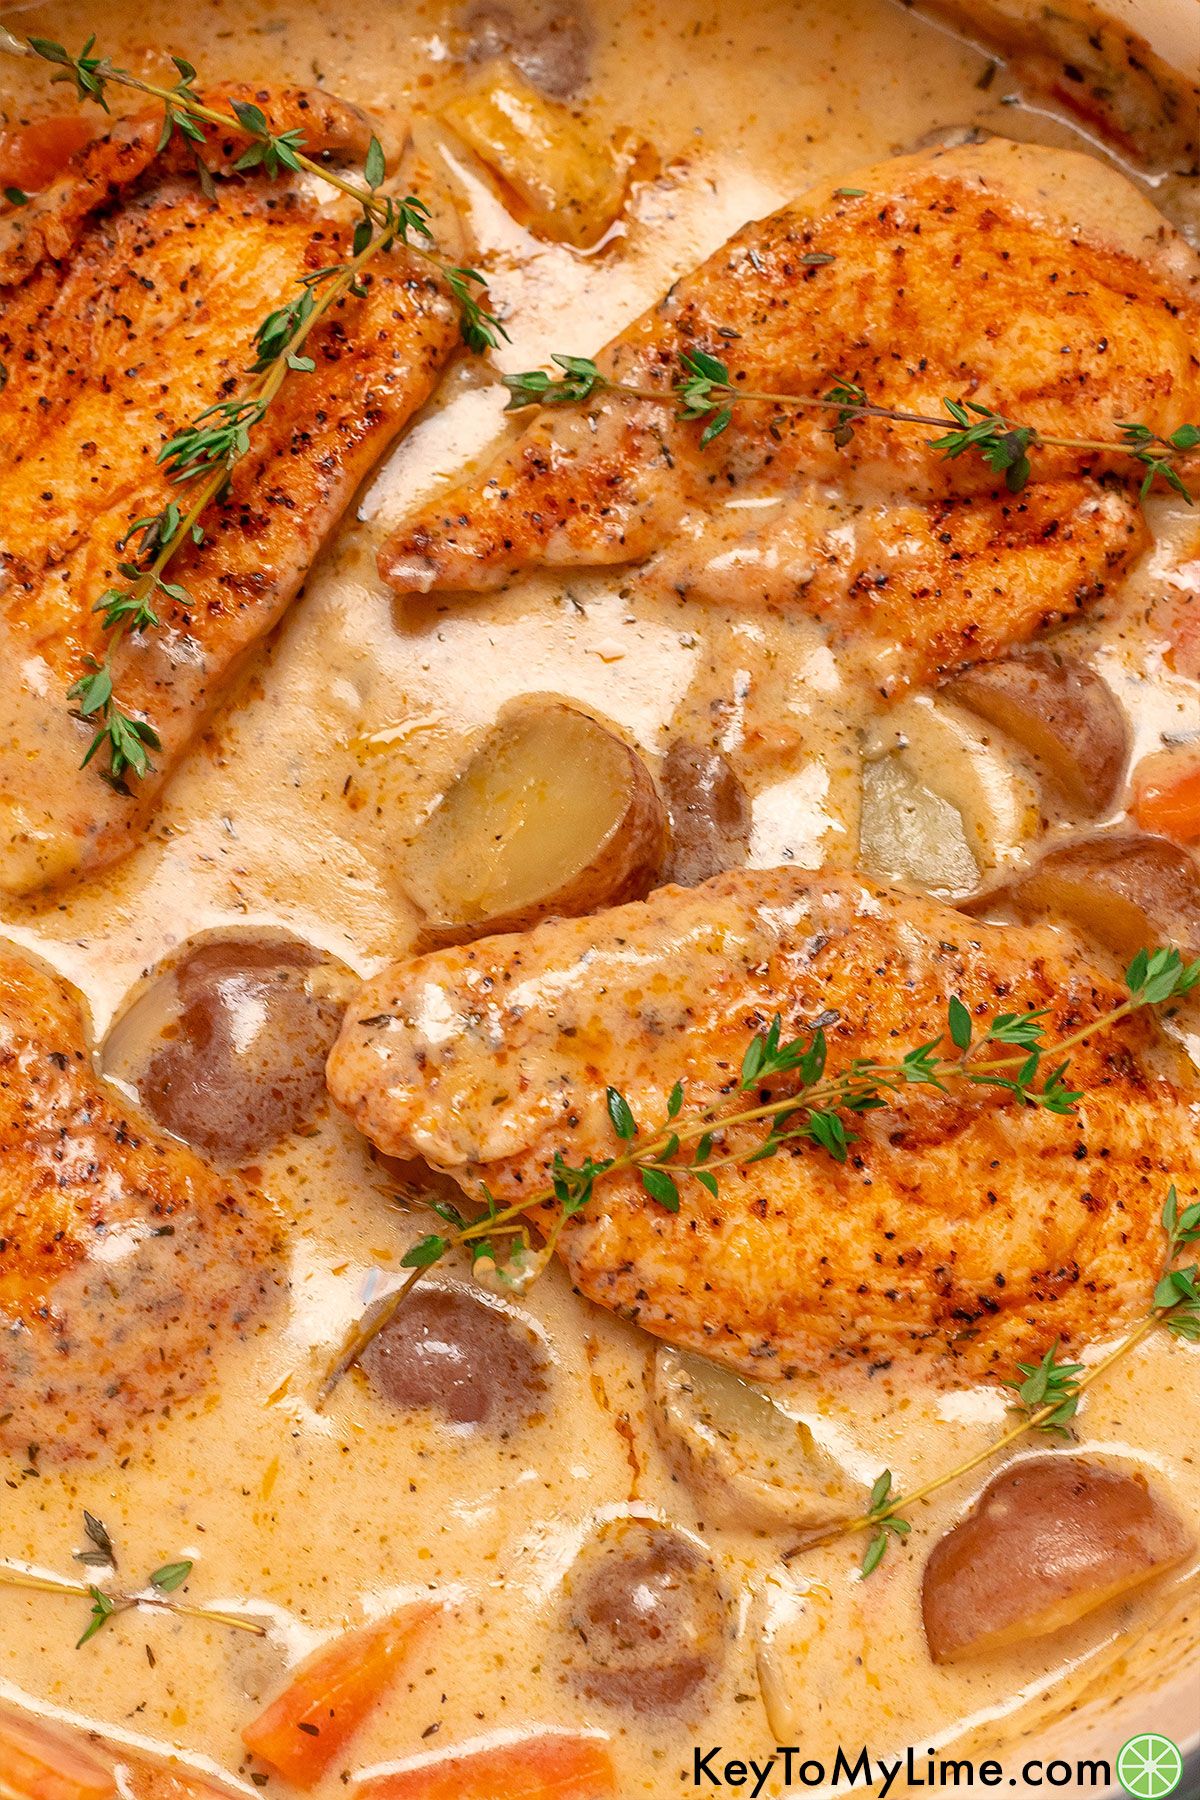 A close up of seared chicken breast showing the creamy texture of the sauce with fresh thyme throughout.